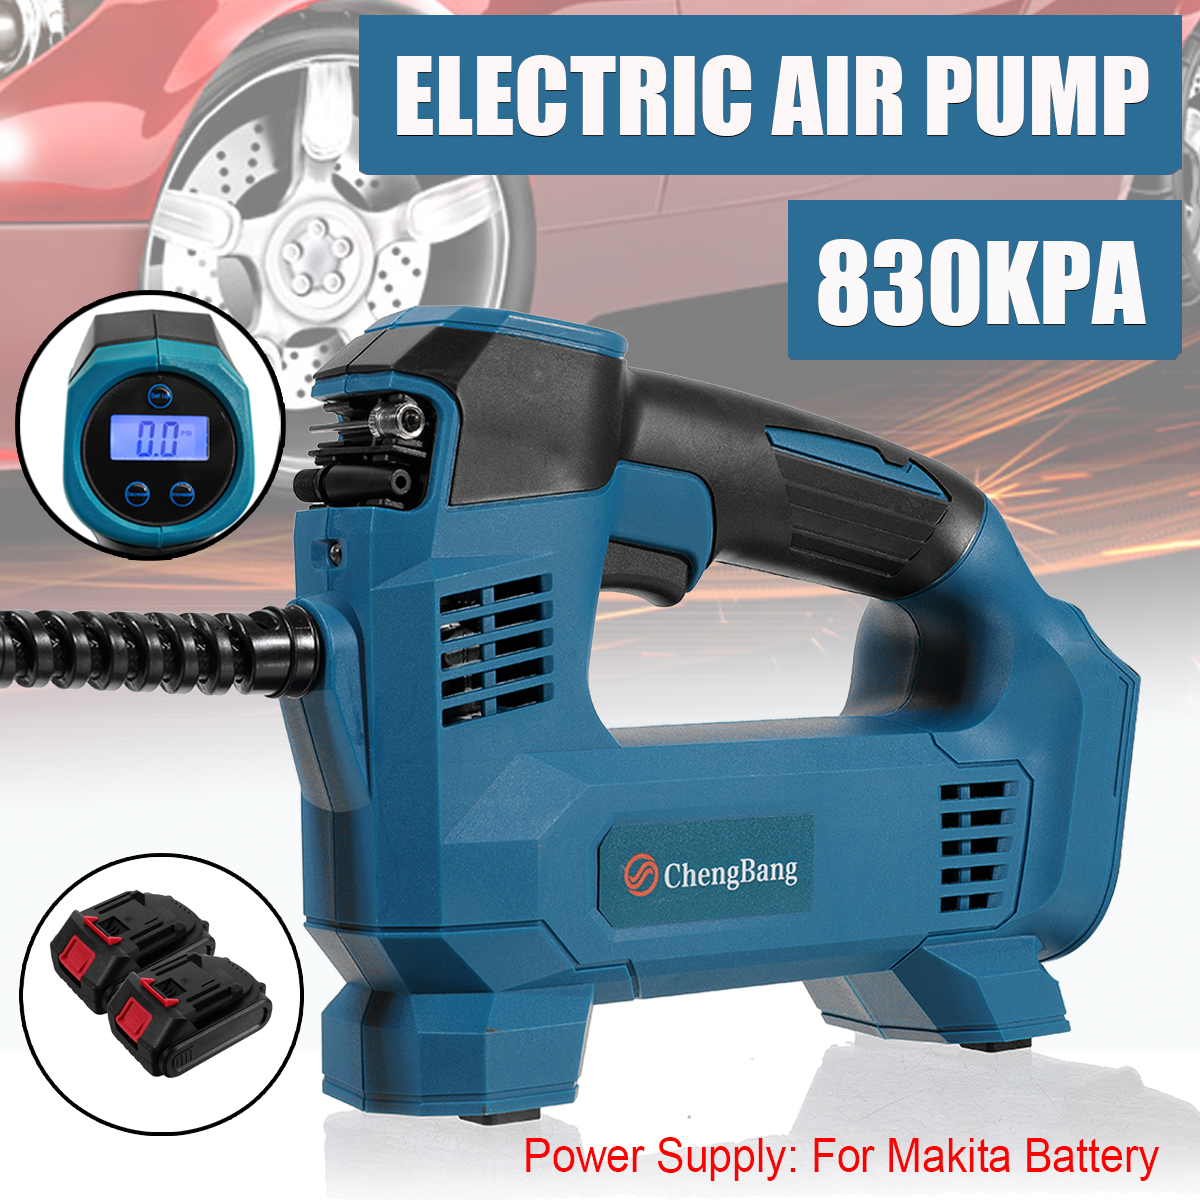 Doersupp-88VF-Cordless-Lithium-Battery-Air-Pump-Rechargeable-Air-Pump-Electric-Inflator-Multi-purpos-1918437-1